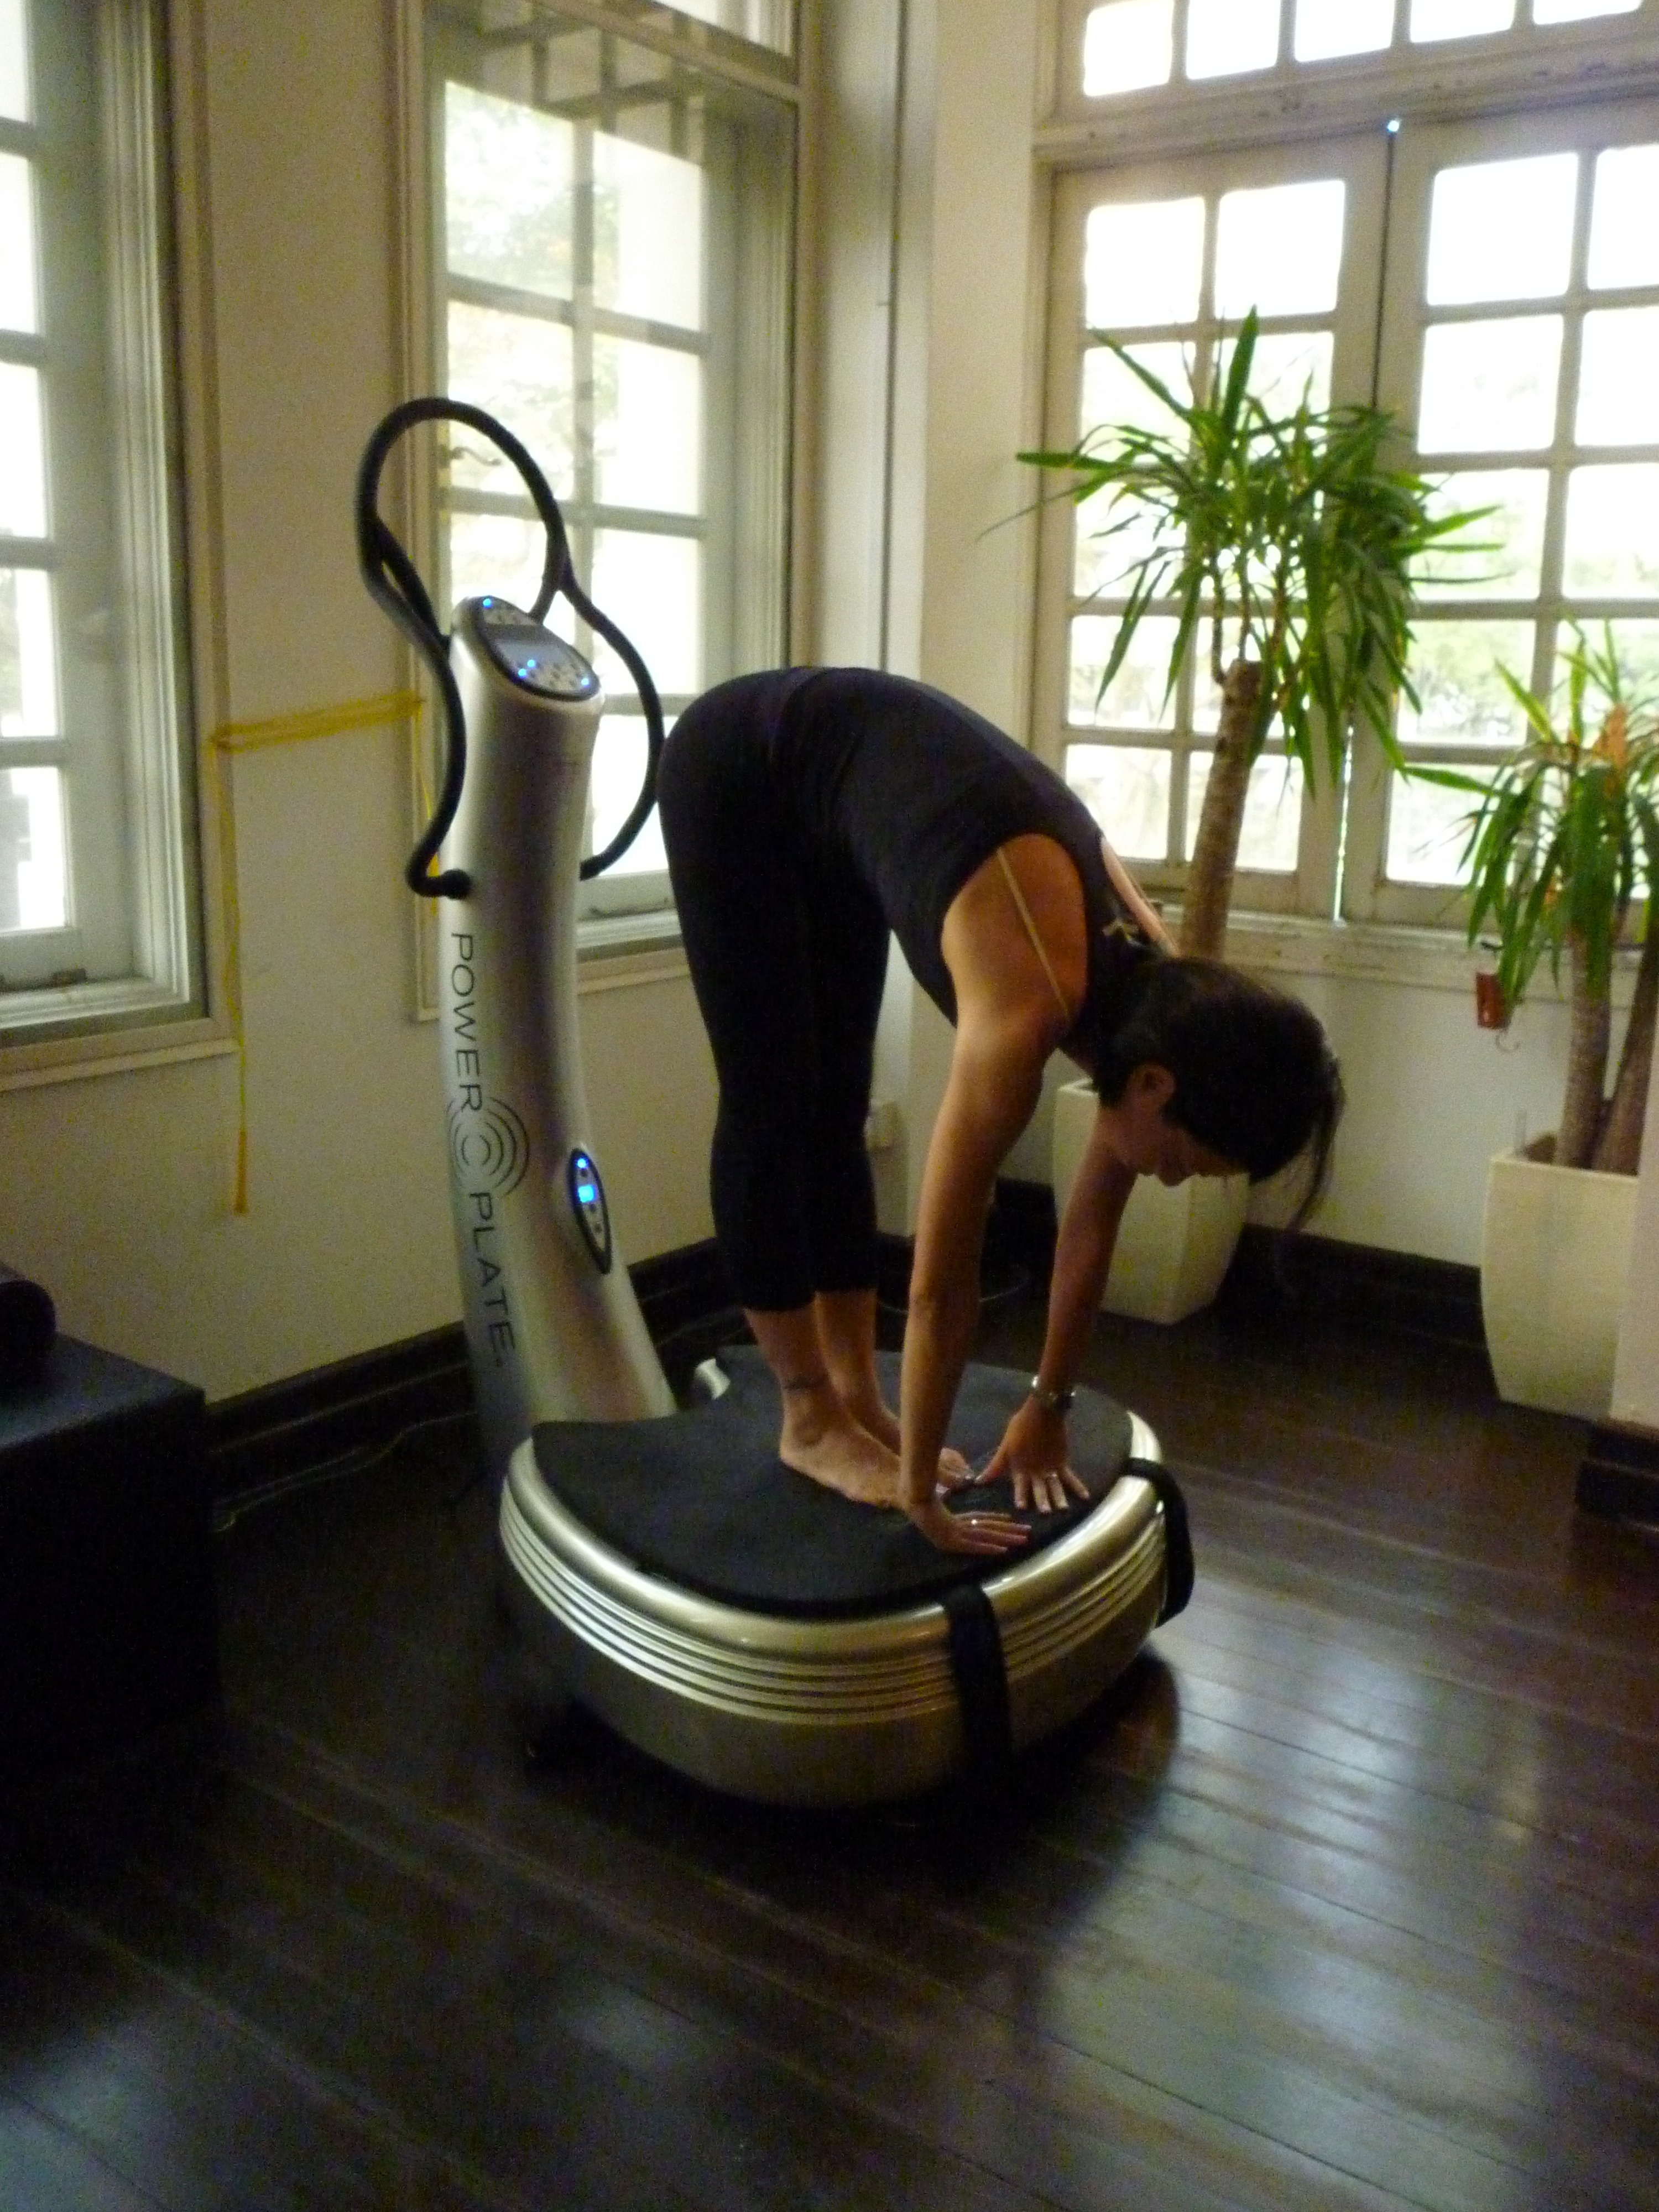 15 Minute Power Plate Cellulite Workout for Burn Fat fast